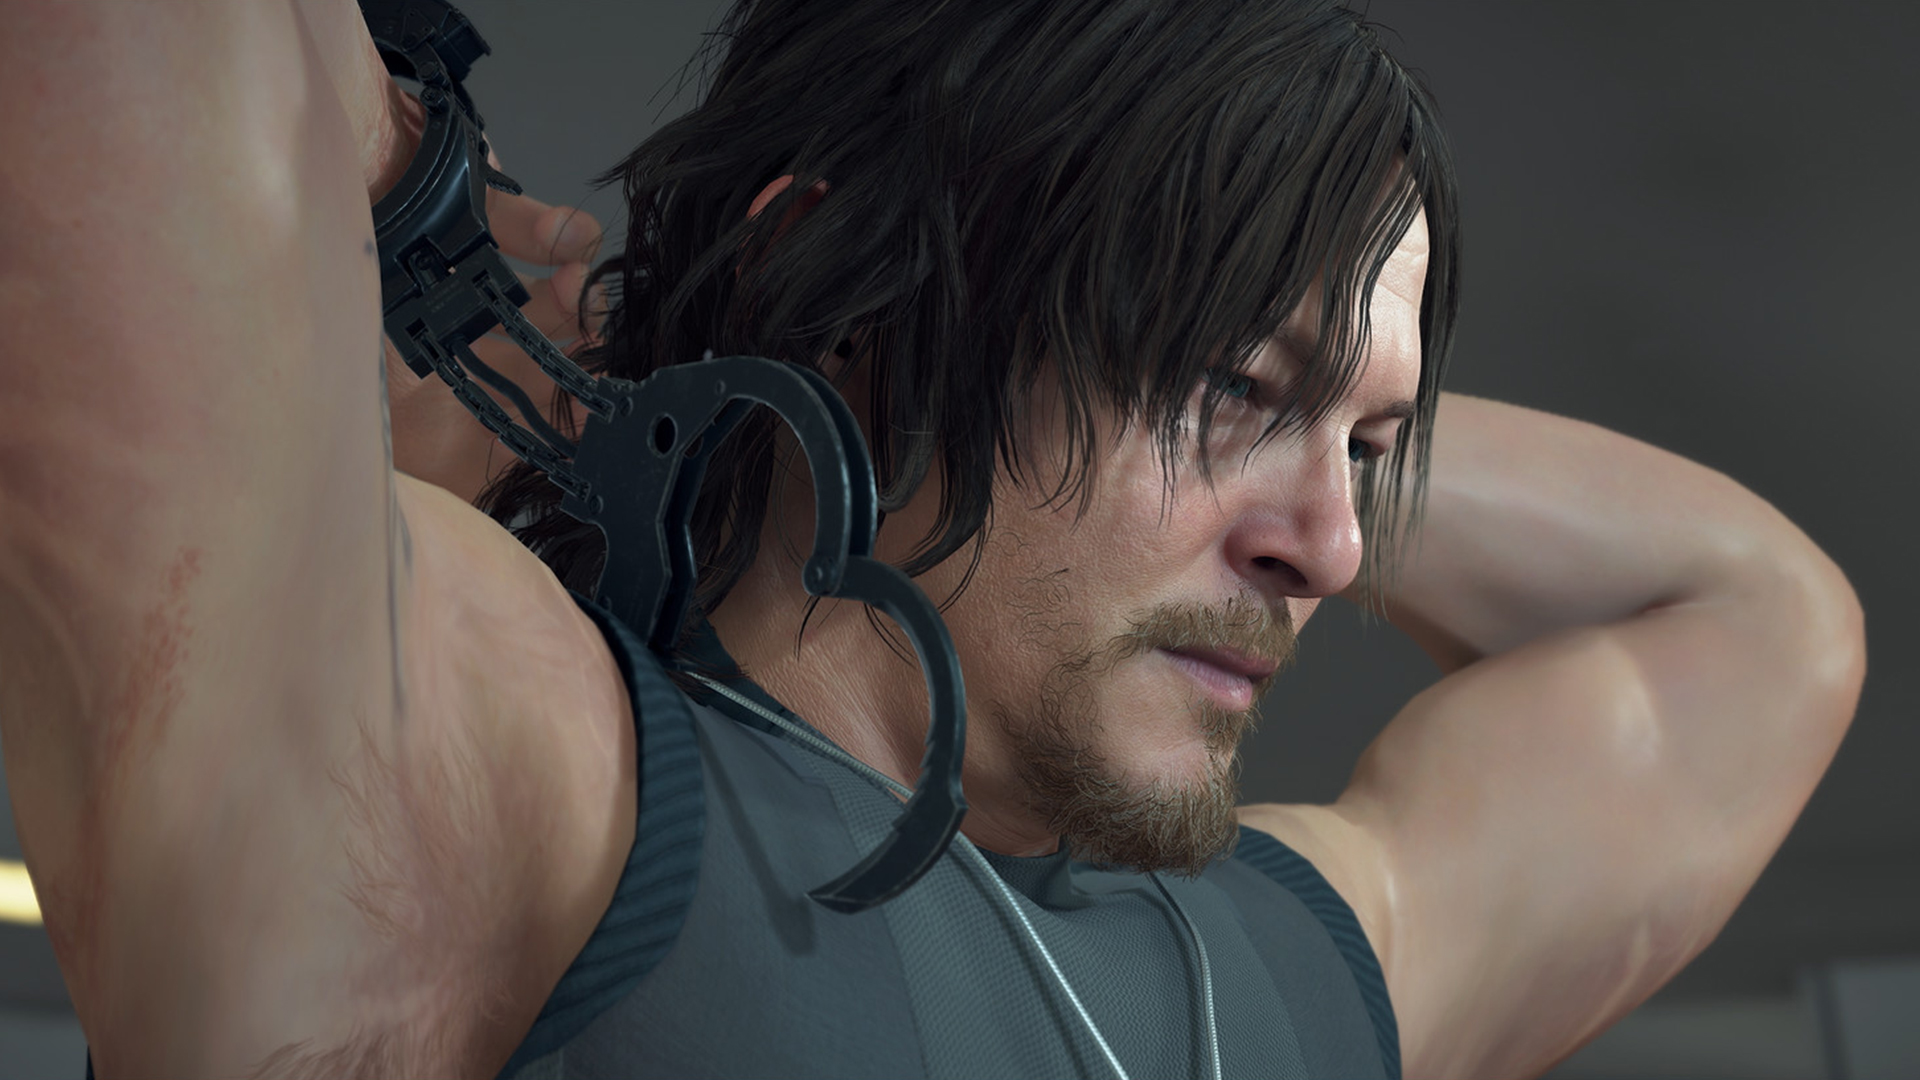 Death Stranding Will Be a Statement, Trying to Move the Industry Forward